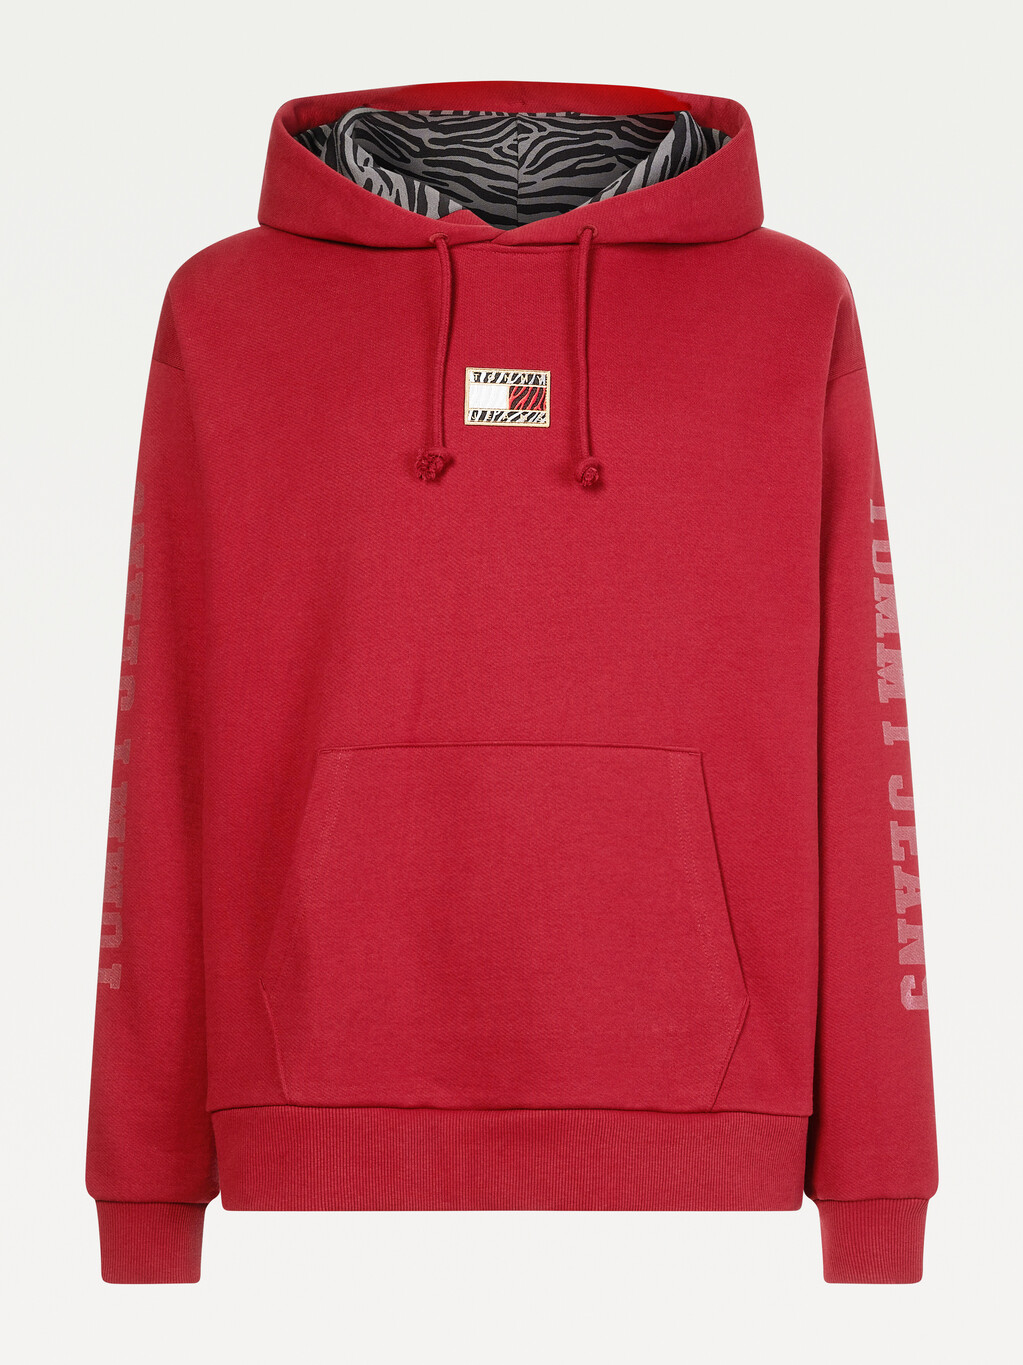 CHINESE NEW YEAR TIGER HOODIE